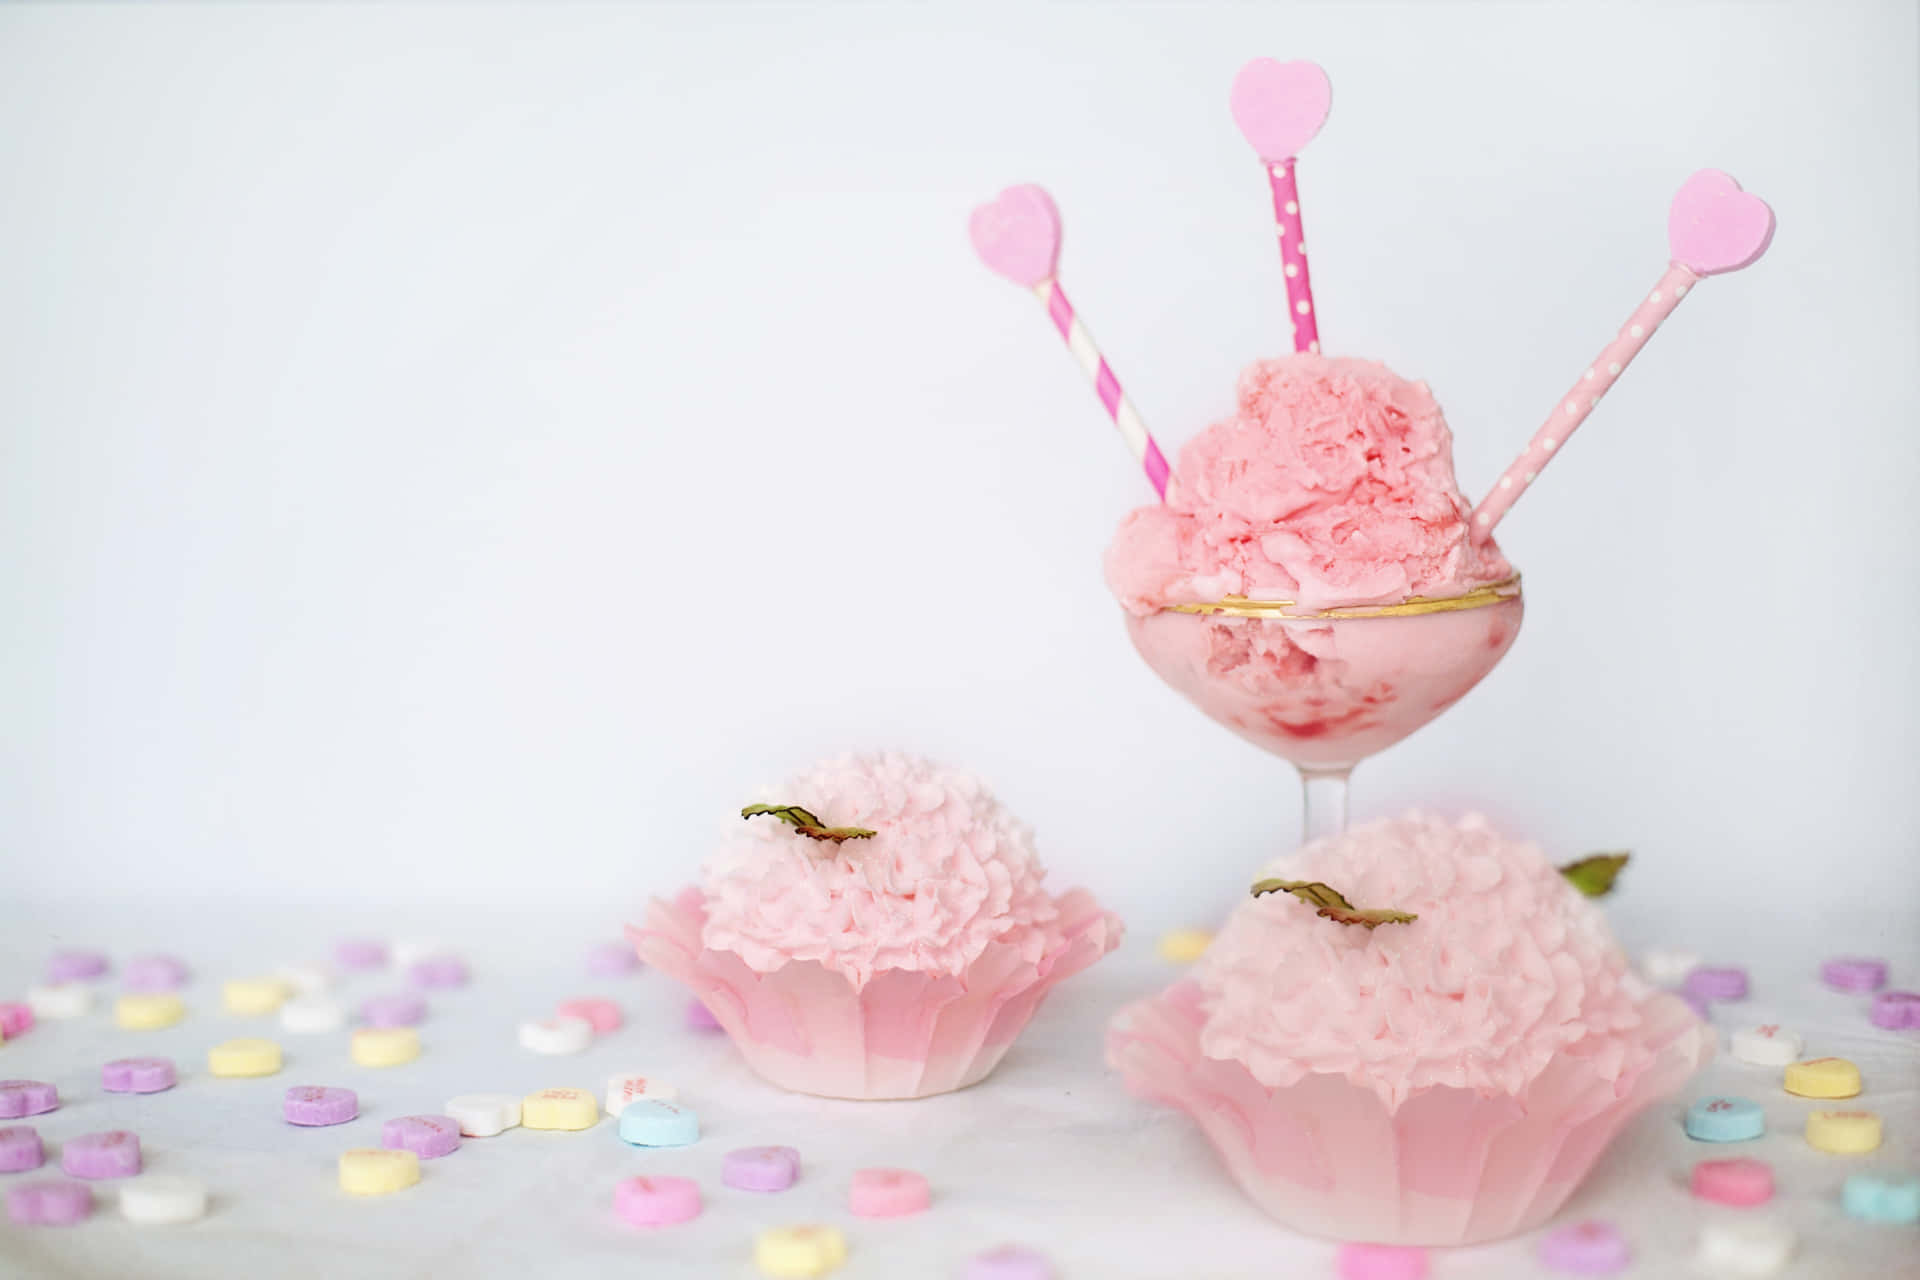 Delicious Pink Cupcakes on Display Wallpaper